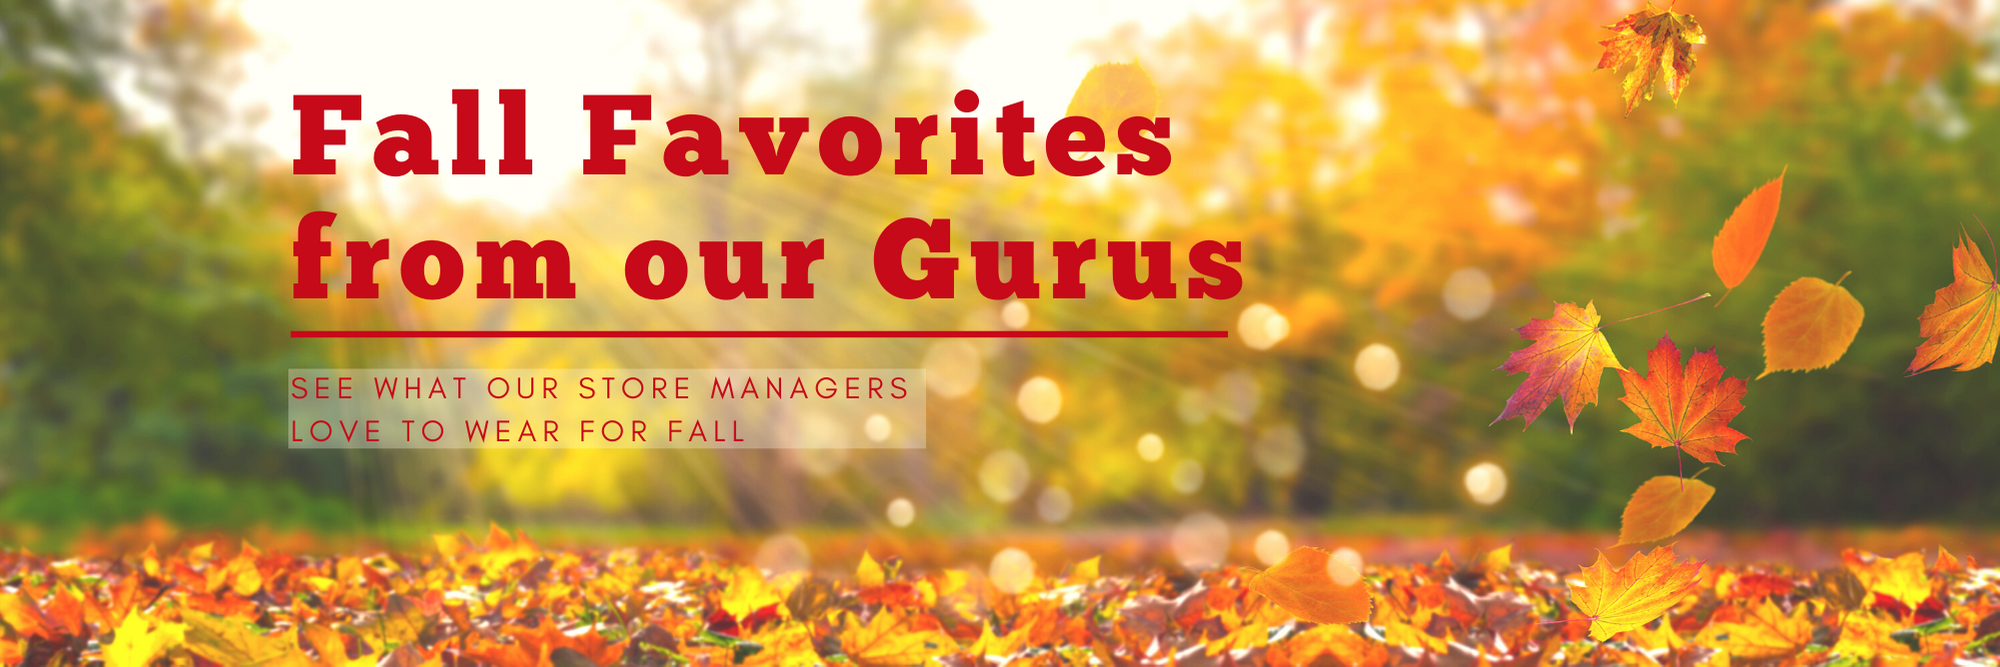 Fall Favorites from Our Stores' Gurus